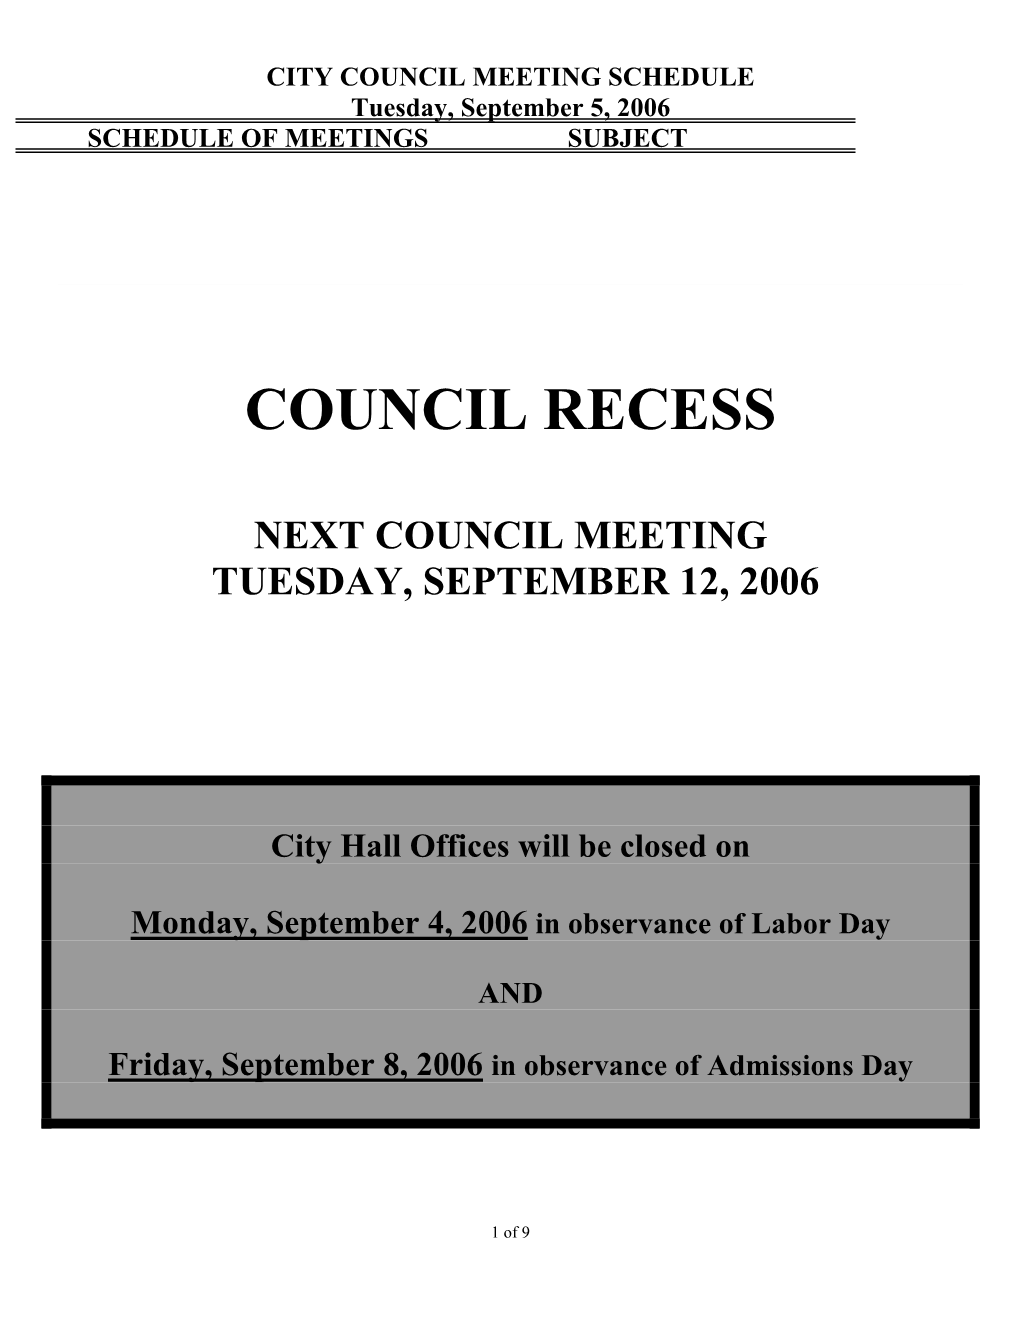 CITY COUNCIL MEETING SCHEDULE Tuesday, September 5, 2006 SCHEDULE of MEETINGS SUBJECT